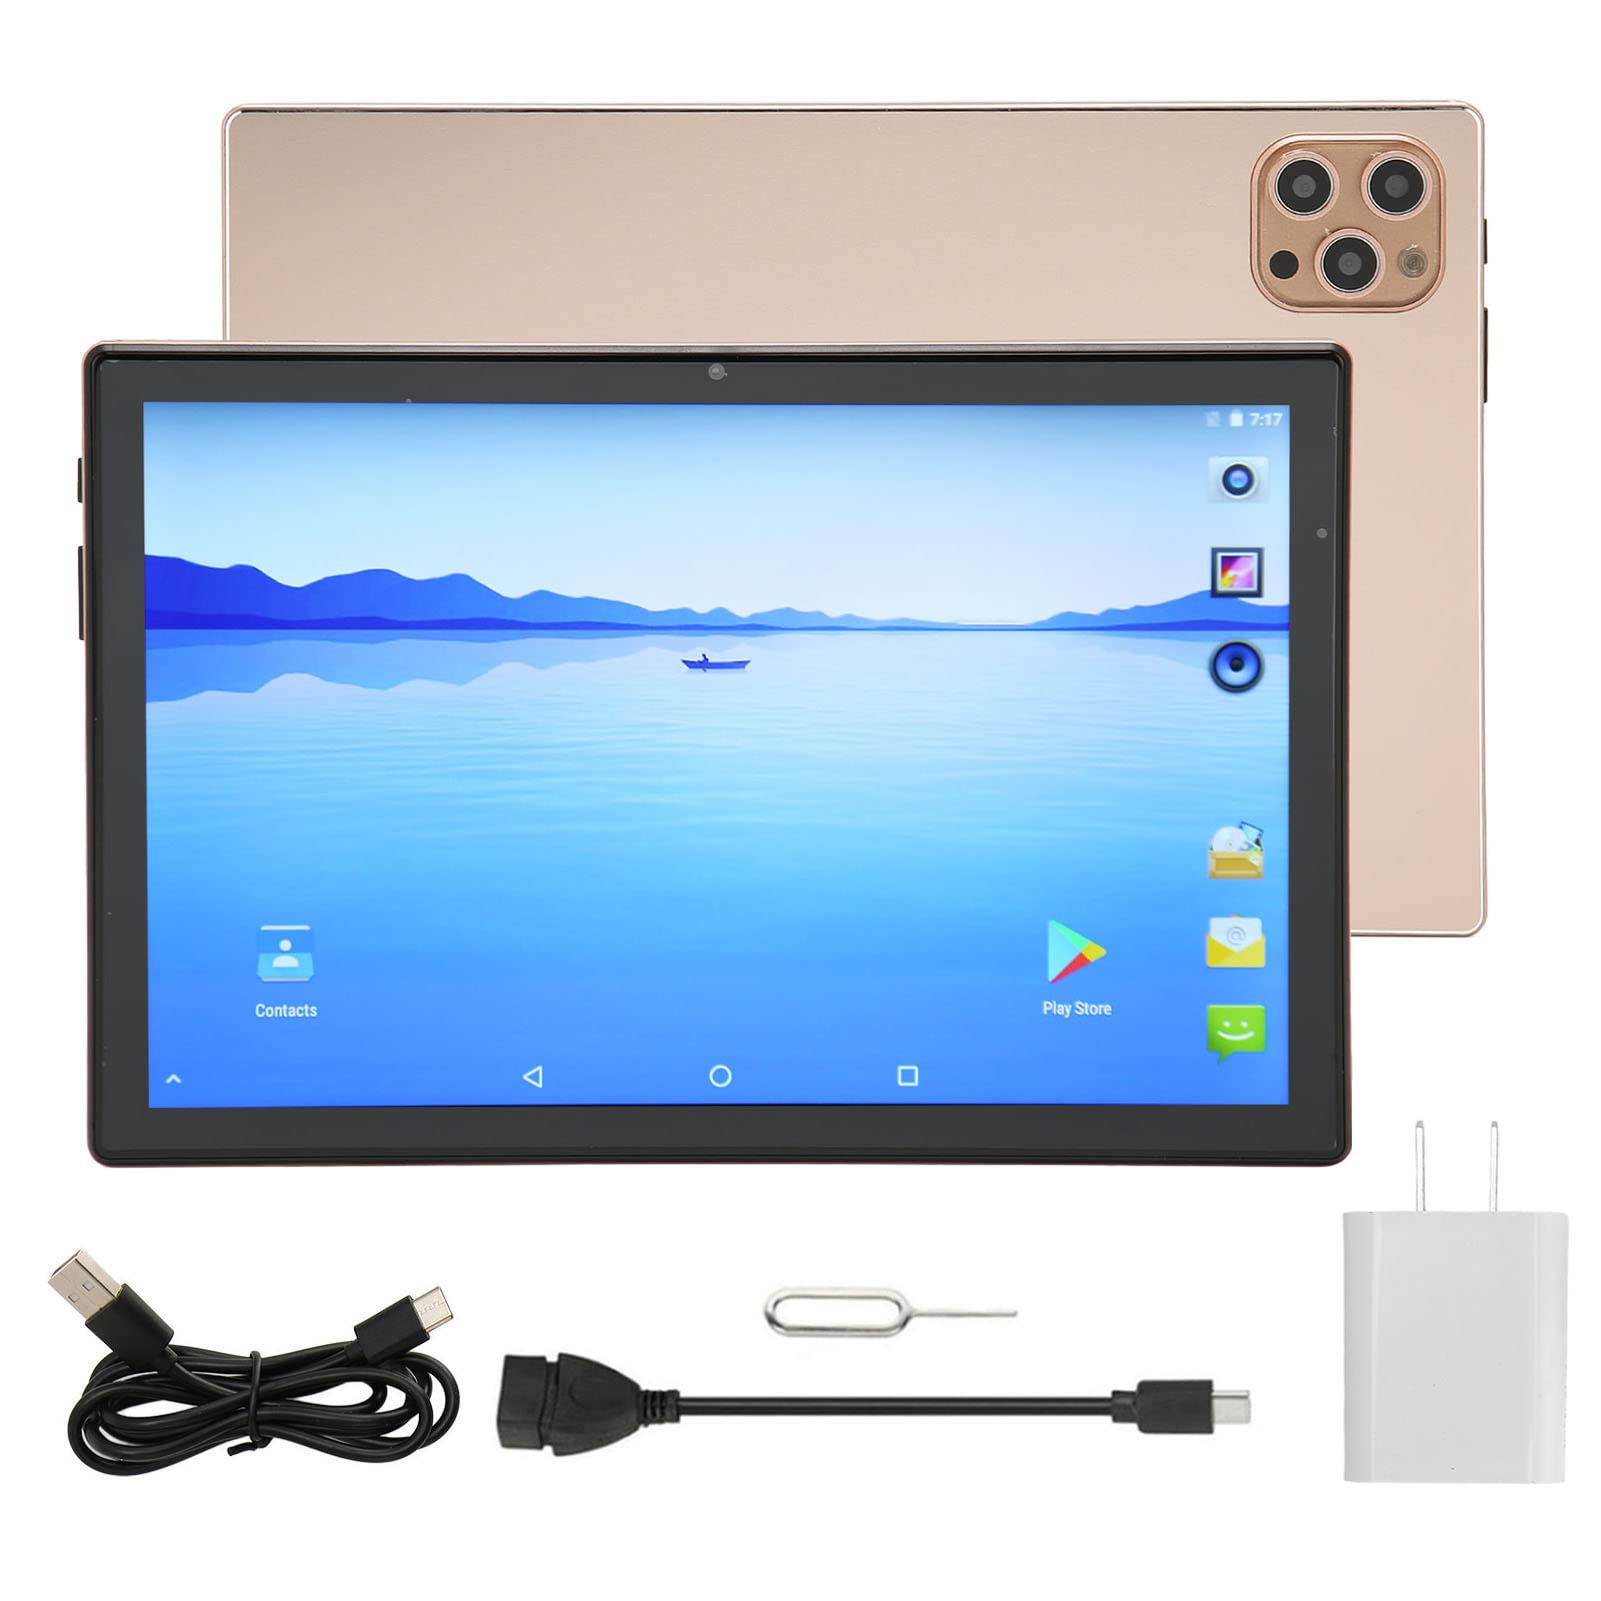 Airshi Tablet PC, Tablet 6G RAM 128G ROM Octa Core Processor 5G 2.4G WiFi Support Call for Home for Travel (US Plug)